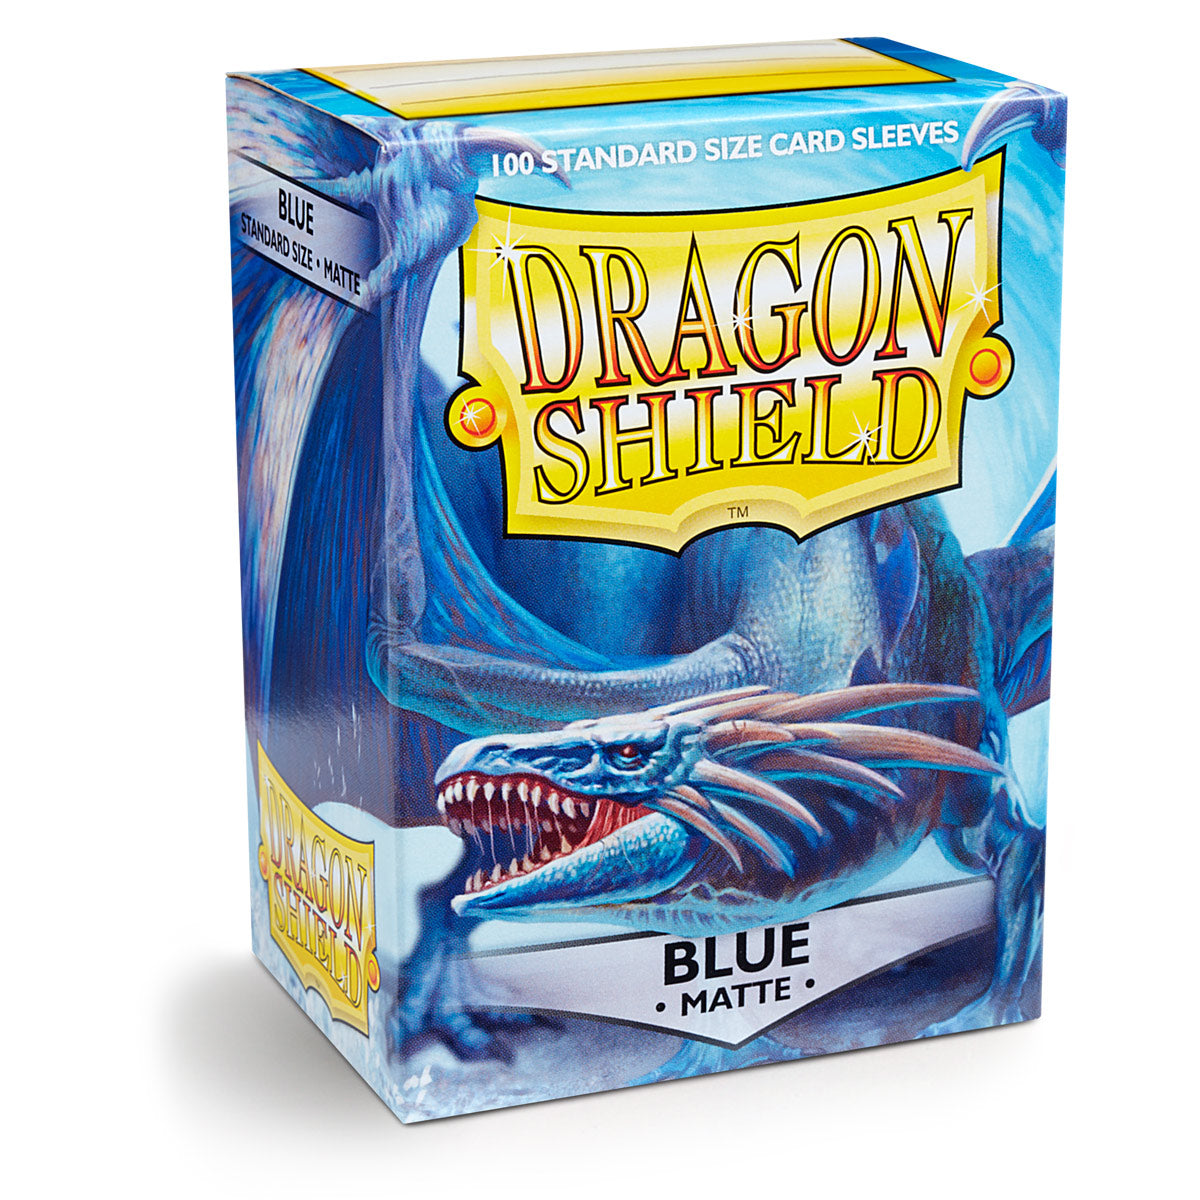 Dragon Shield Deck Protector Sleeves - Matte Blue (100 Count)